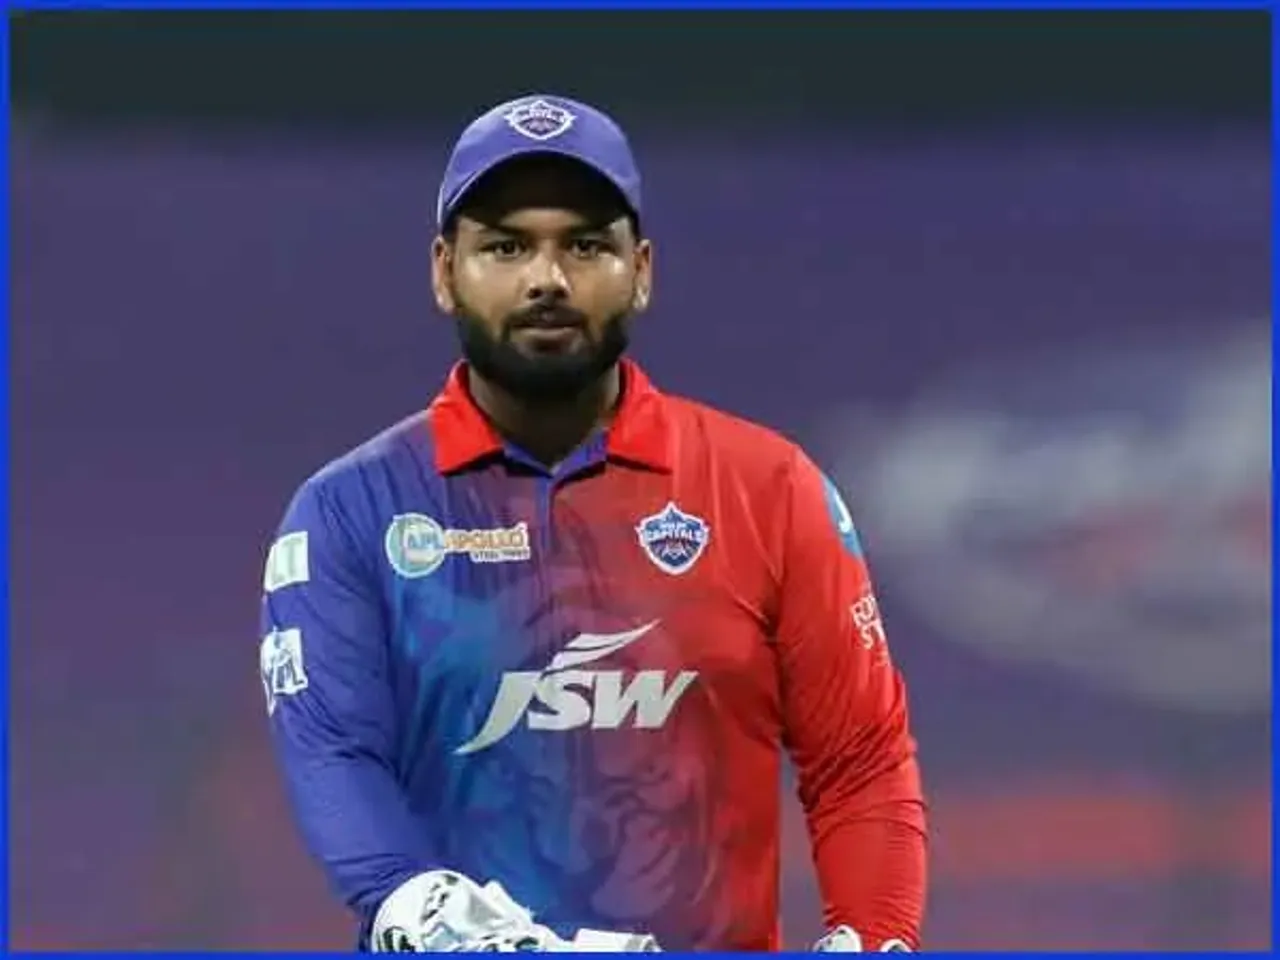 IPL 2022 News: Rishabh Pant, Shardul Thakur, and Pravin Amre fined for breaching the IPL Code Of Conduct | Sportzpoint.com